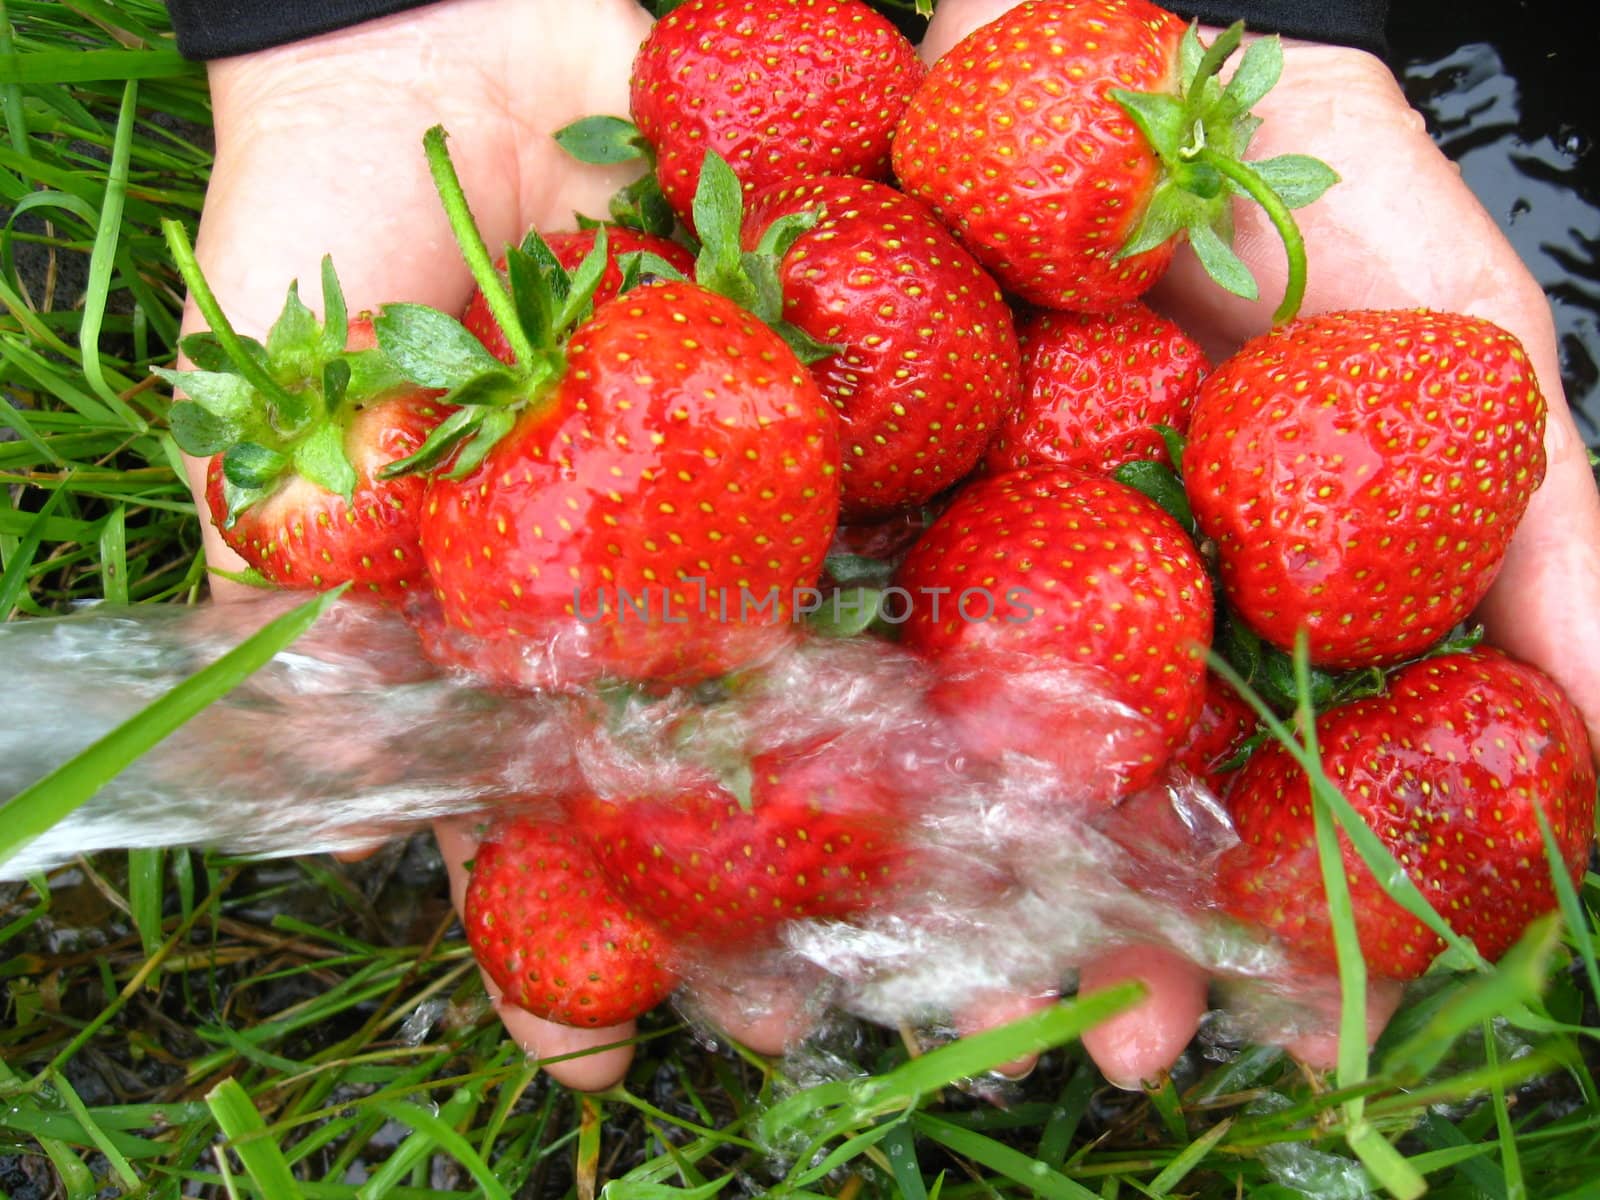 the process of washing of the fresh  strawberry